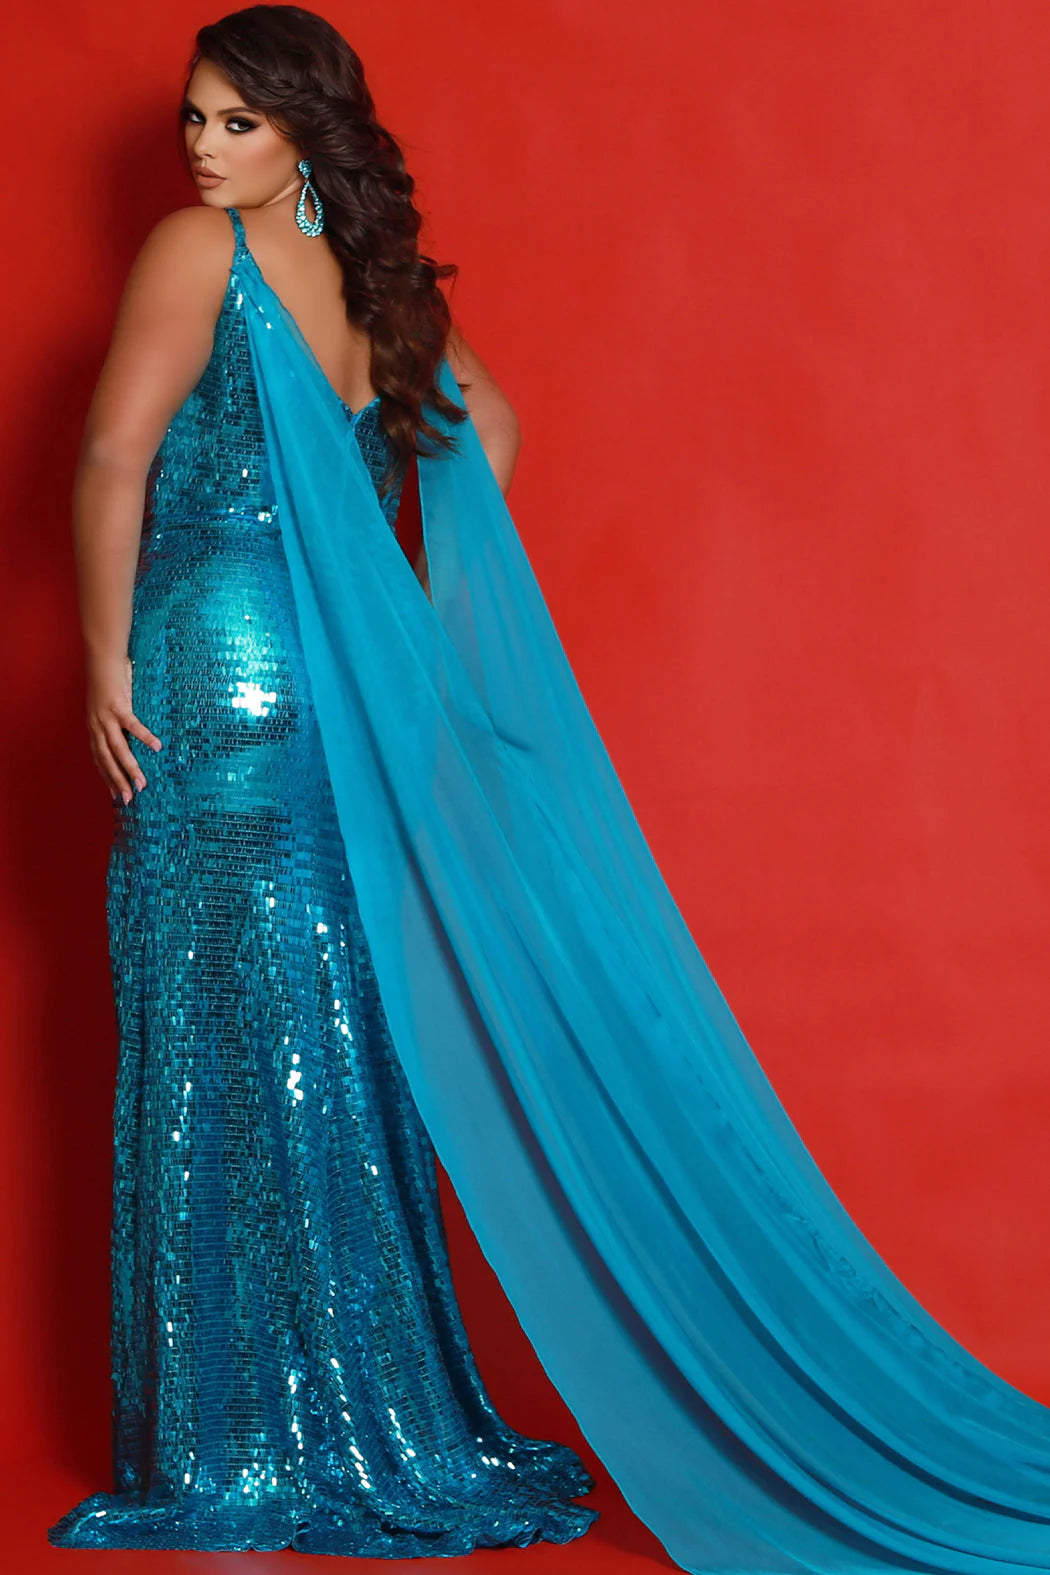 The Sydneys Closet JK2413 is a stunning long, fitted plus size prom dress with a sequin cape and a plunging neckline, V-back, and slit. The perfect dress for a special occasion, this gown is sure to make you stand out. Strut your stuff at any formal evening in this glamorous plus size sequin pageant gown. The Shocks floor-length evening dress dazzles in overall piano key fabric that sparkles all night.